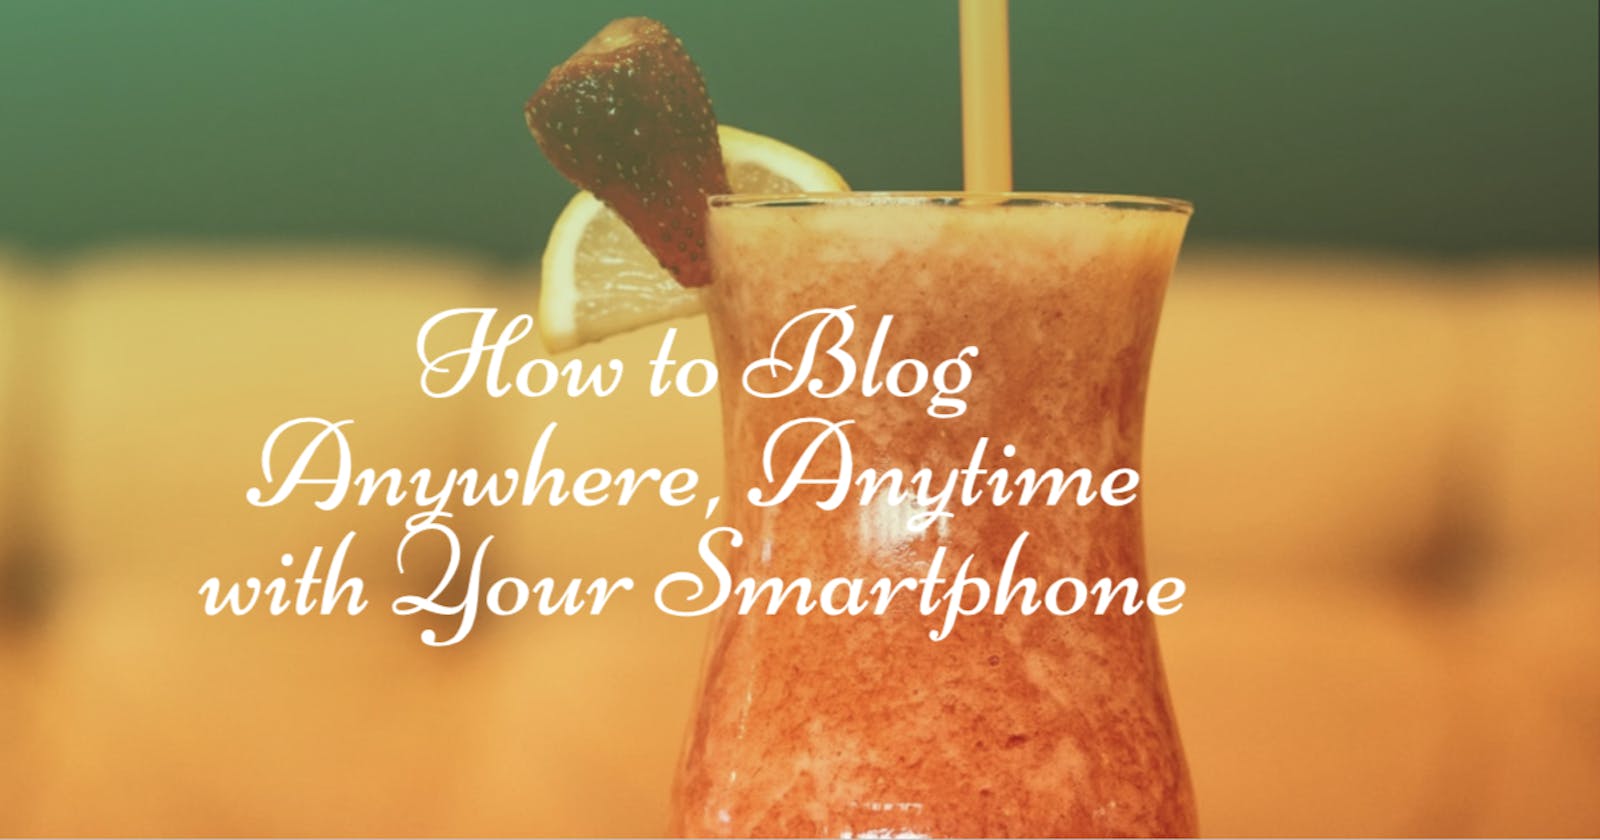 Make blogging convenient and easy with your smartphone!